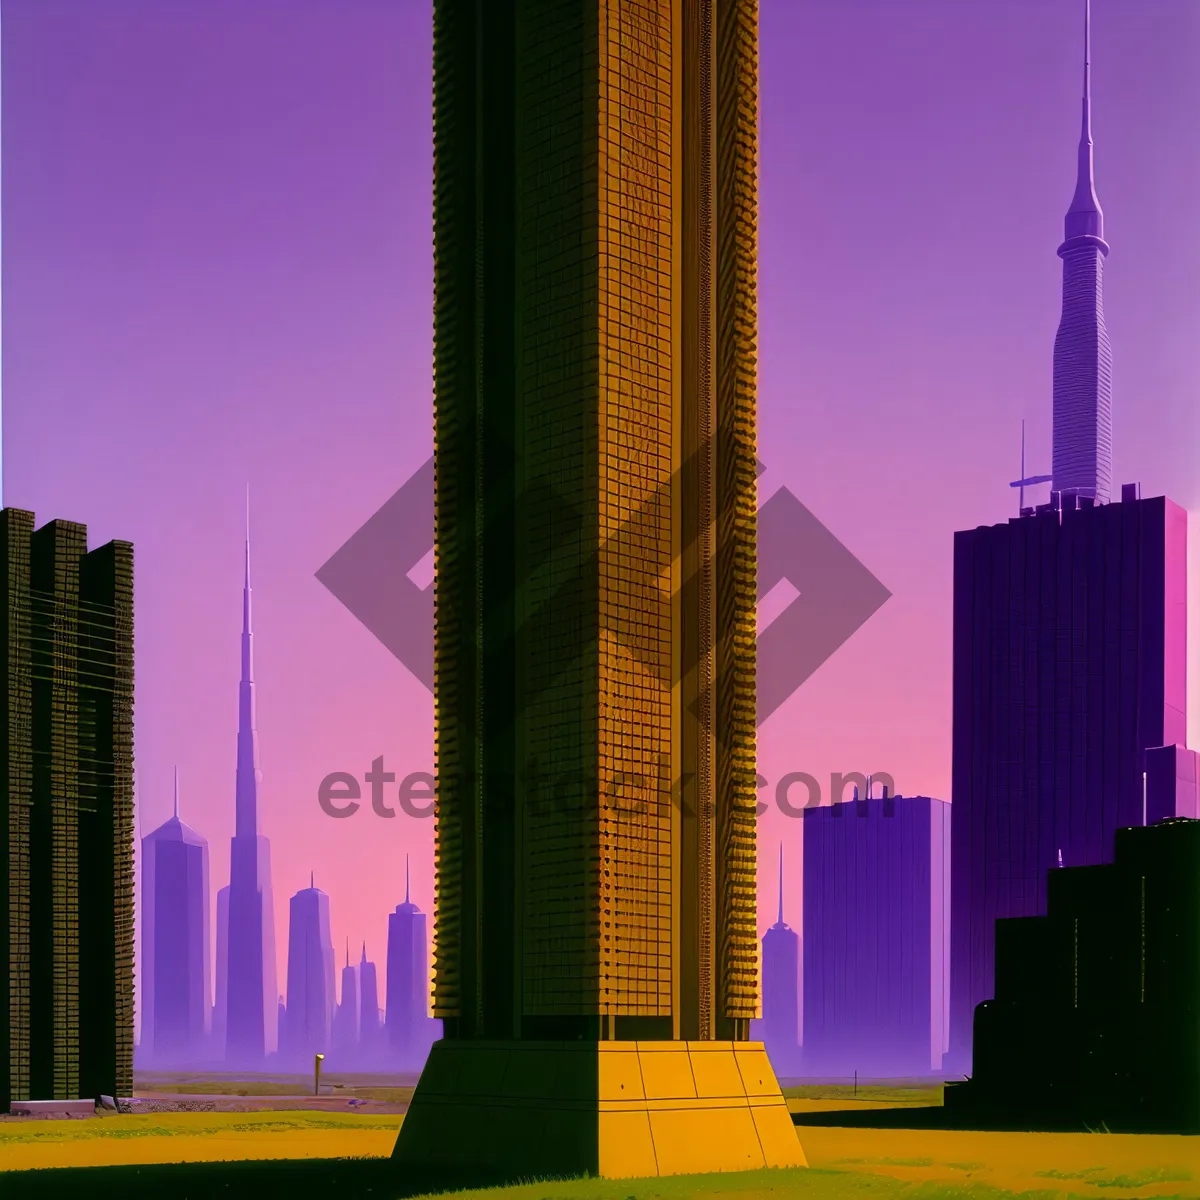 Picture of Urban Skyline: Modern Skyscrapers in City